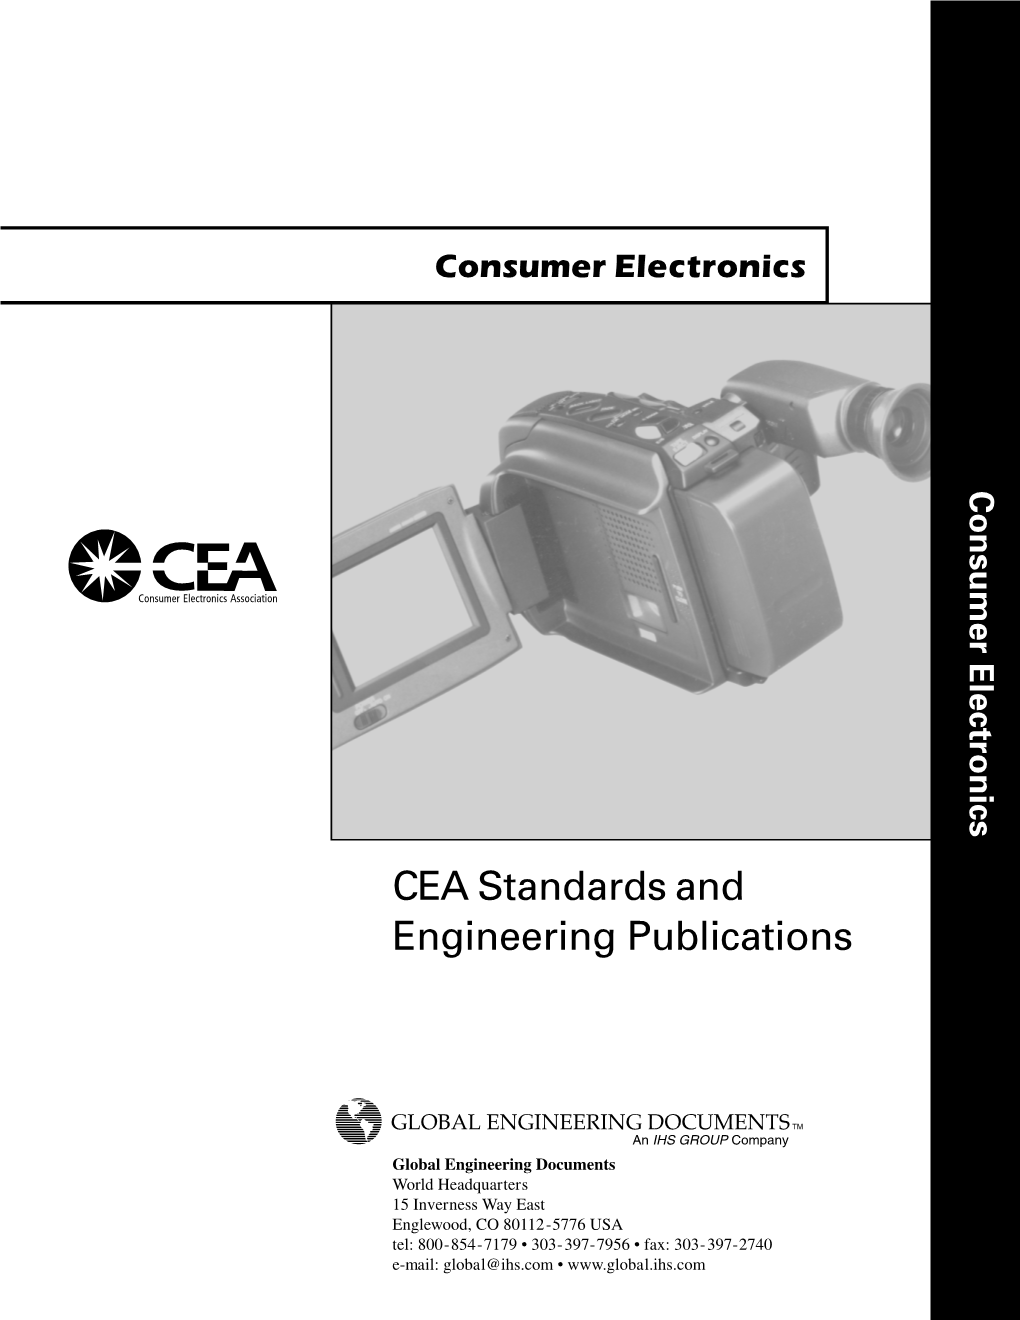 CEA Standards and Engineering Publications